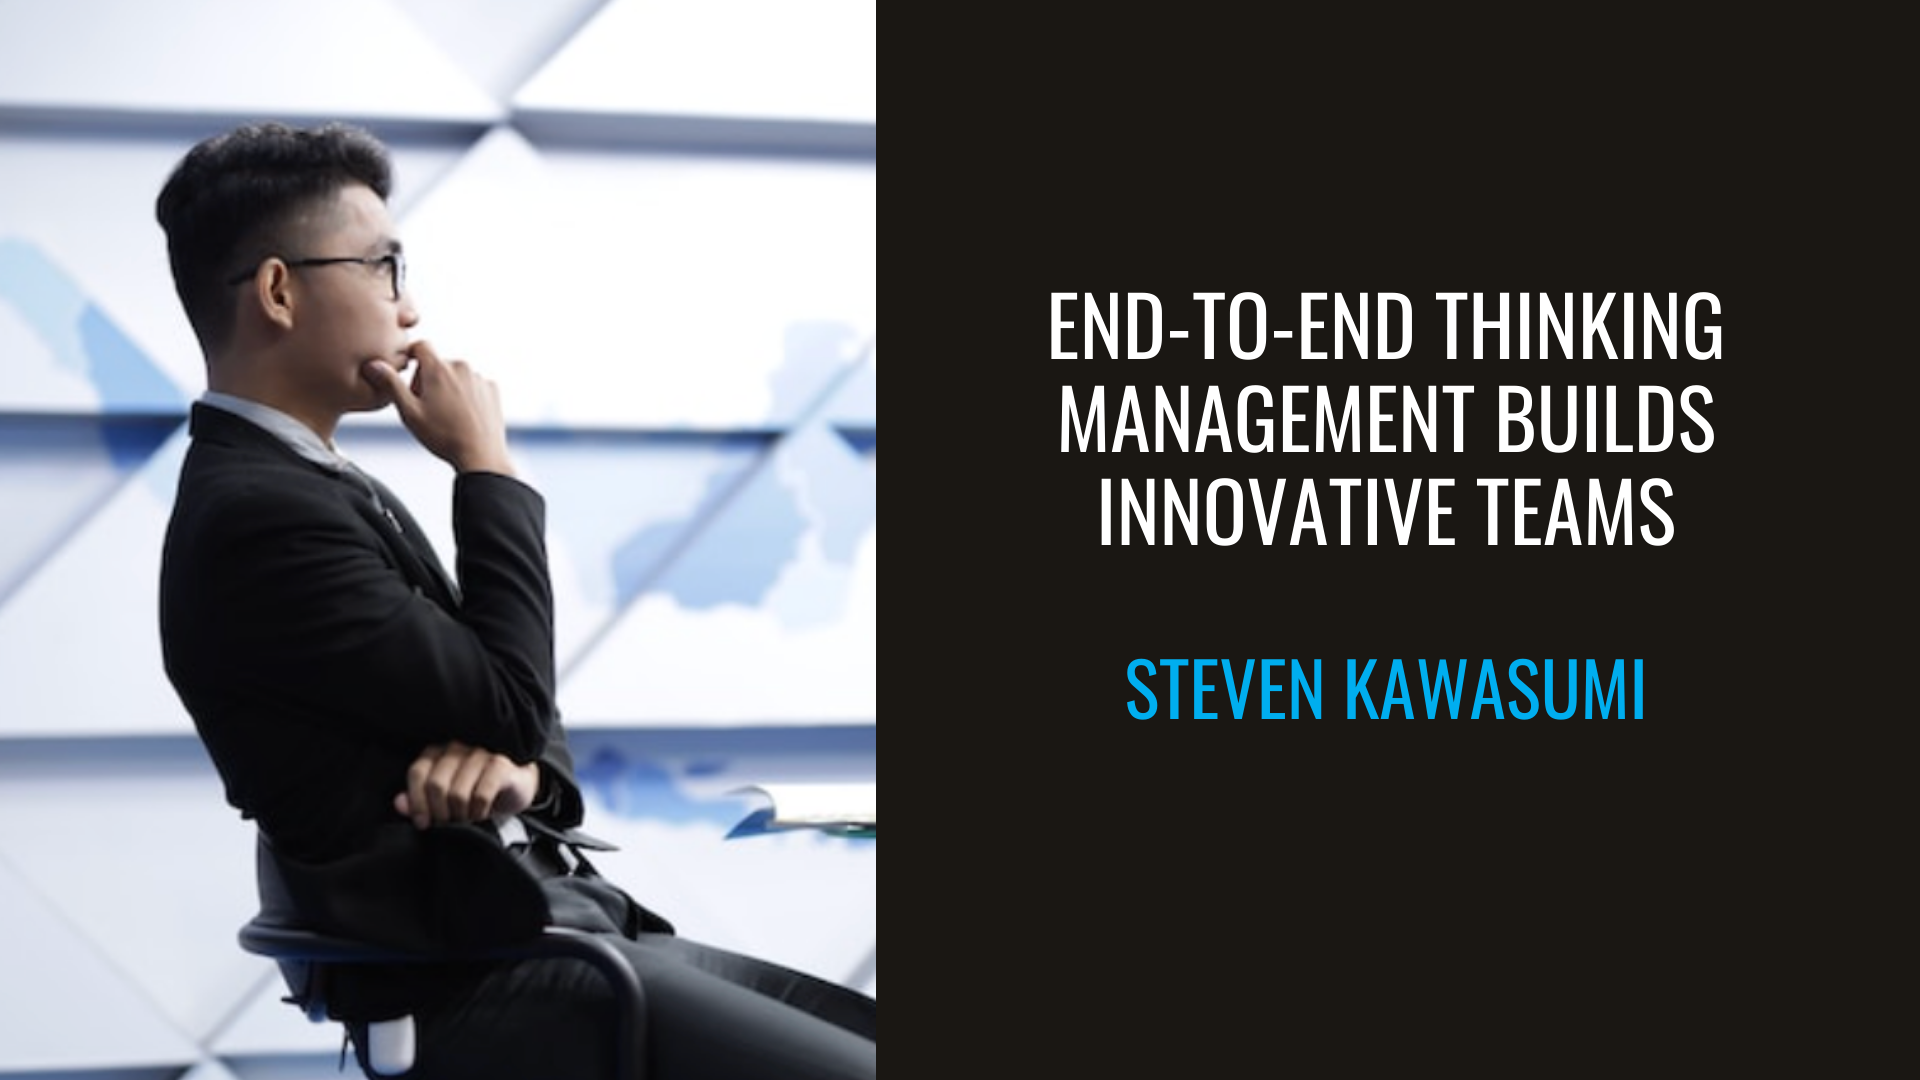 End-to-End Thinking Management Builds Innovative Teams